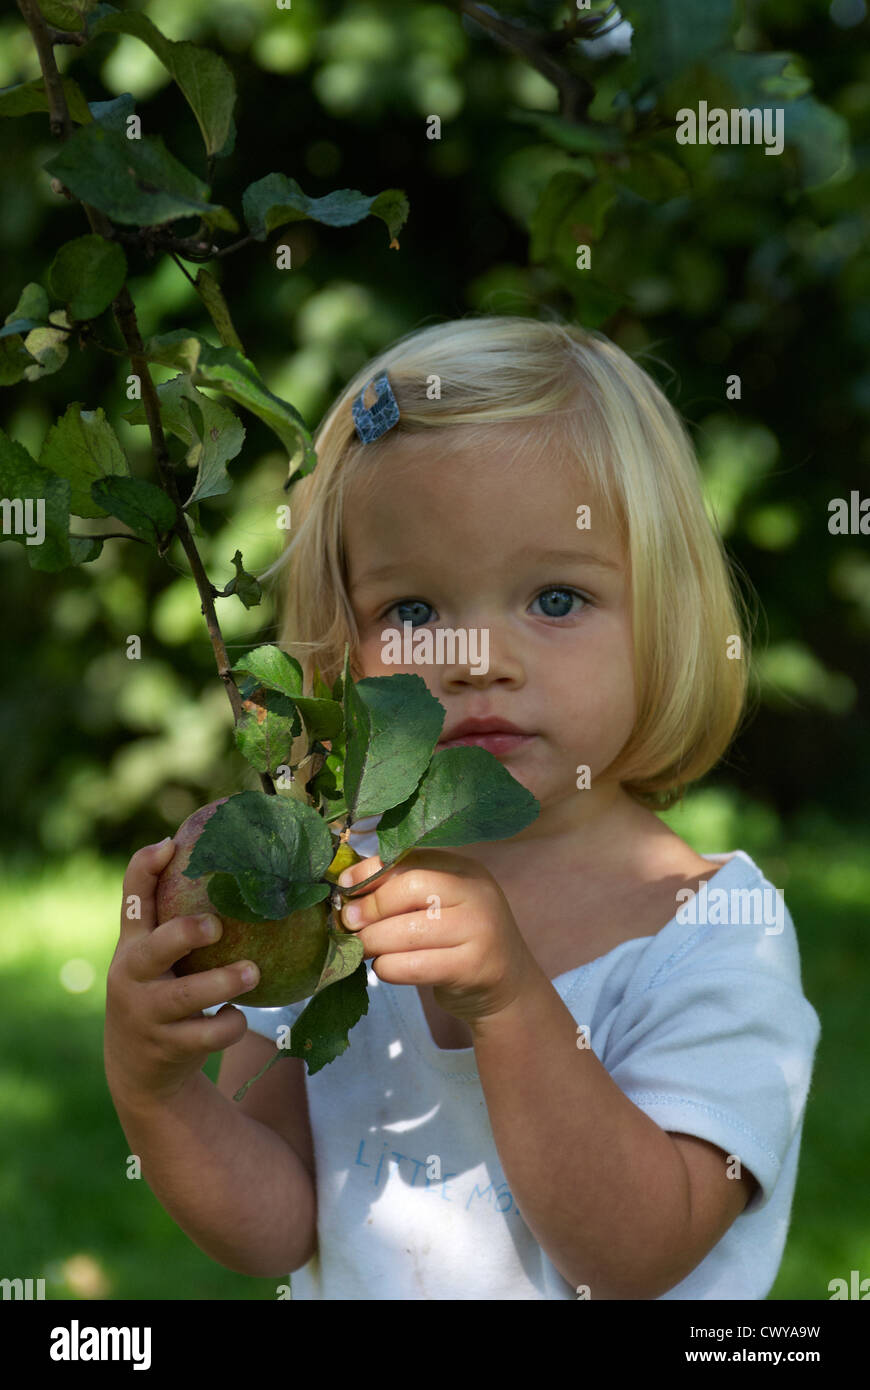 Child Baby Blond Girl Picking Apple Fruit From Tree Summer 1 2 Years Old Stock Photo Alamy